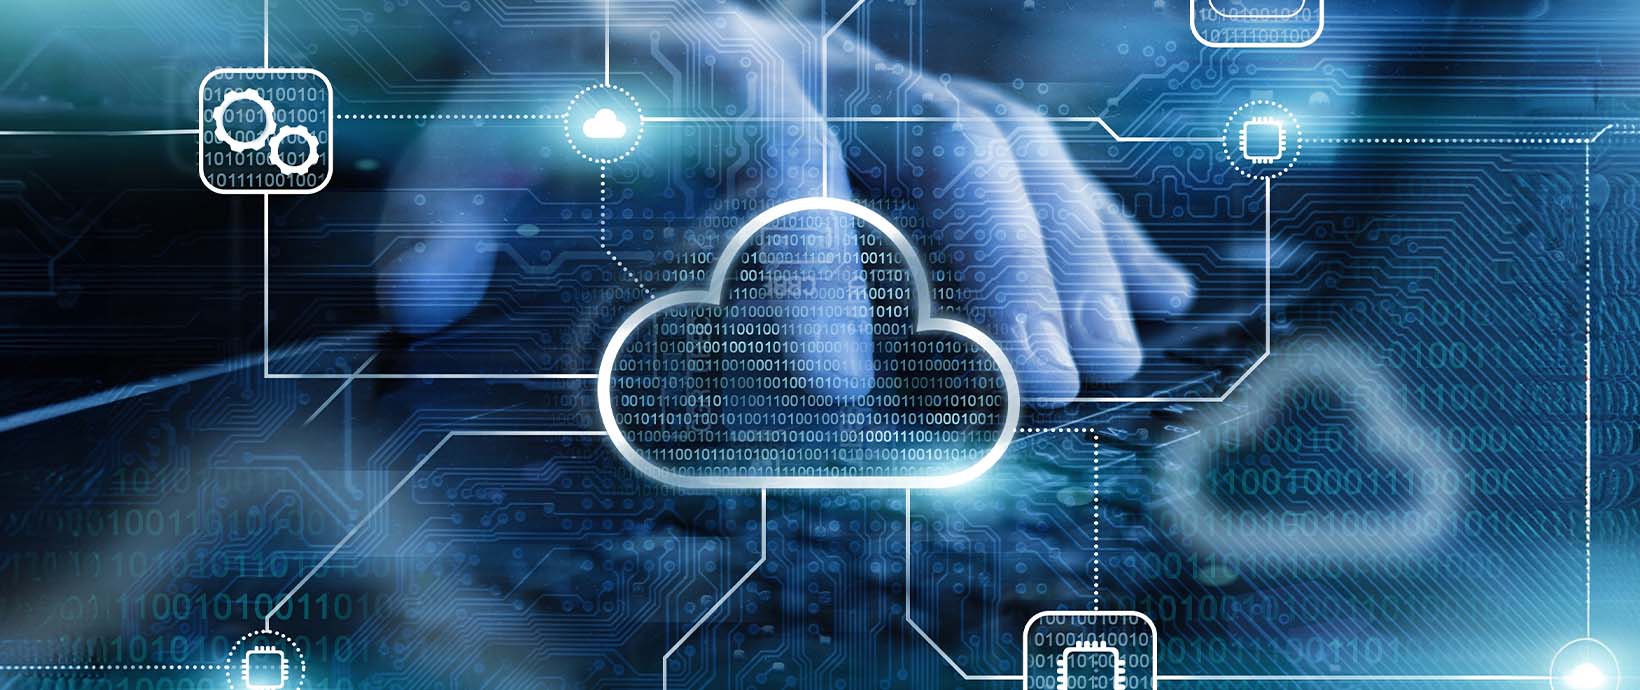 Altair and KITECH Collaborate to Build Advanced Digital Transformation Cloud Platforms for Small- and Medium-Sized Businesses